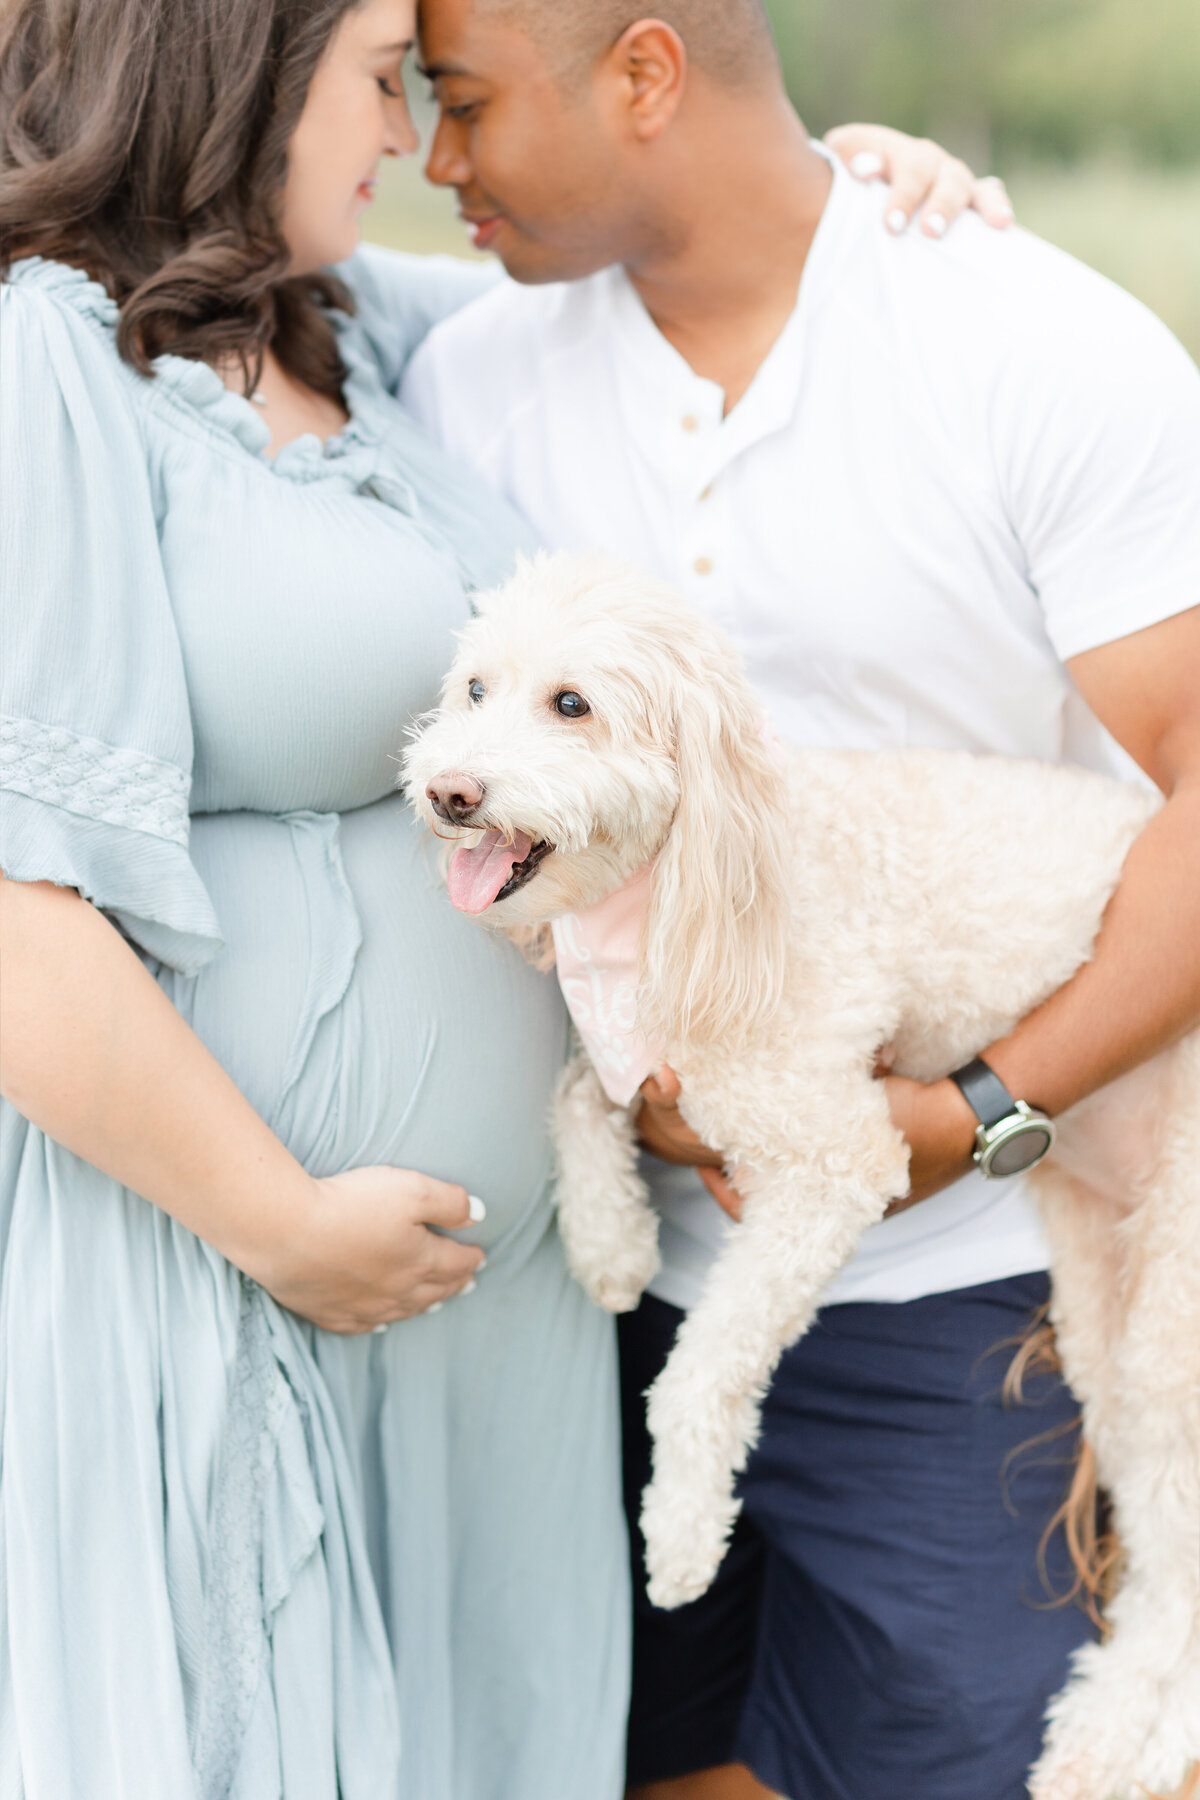 A baby photography northern virginia photo of a pregnant couple forehead to forehead while holding their goldendoodle dog